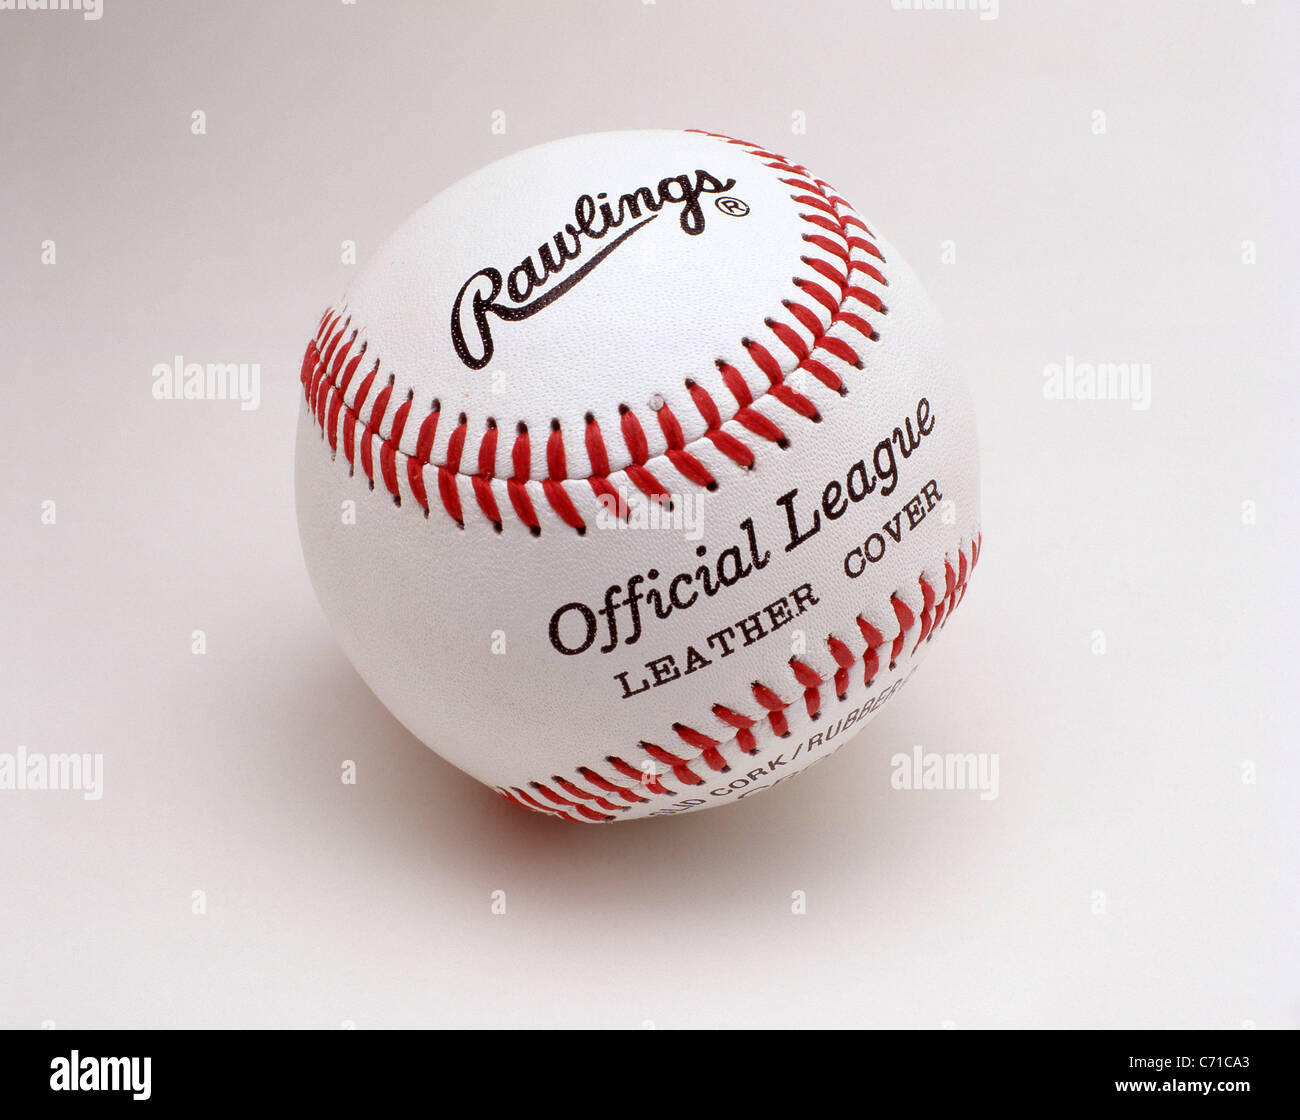 Official League, leather cover, Rawlings baseball, United States of America Stock Photo